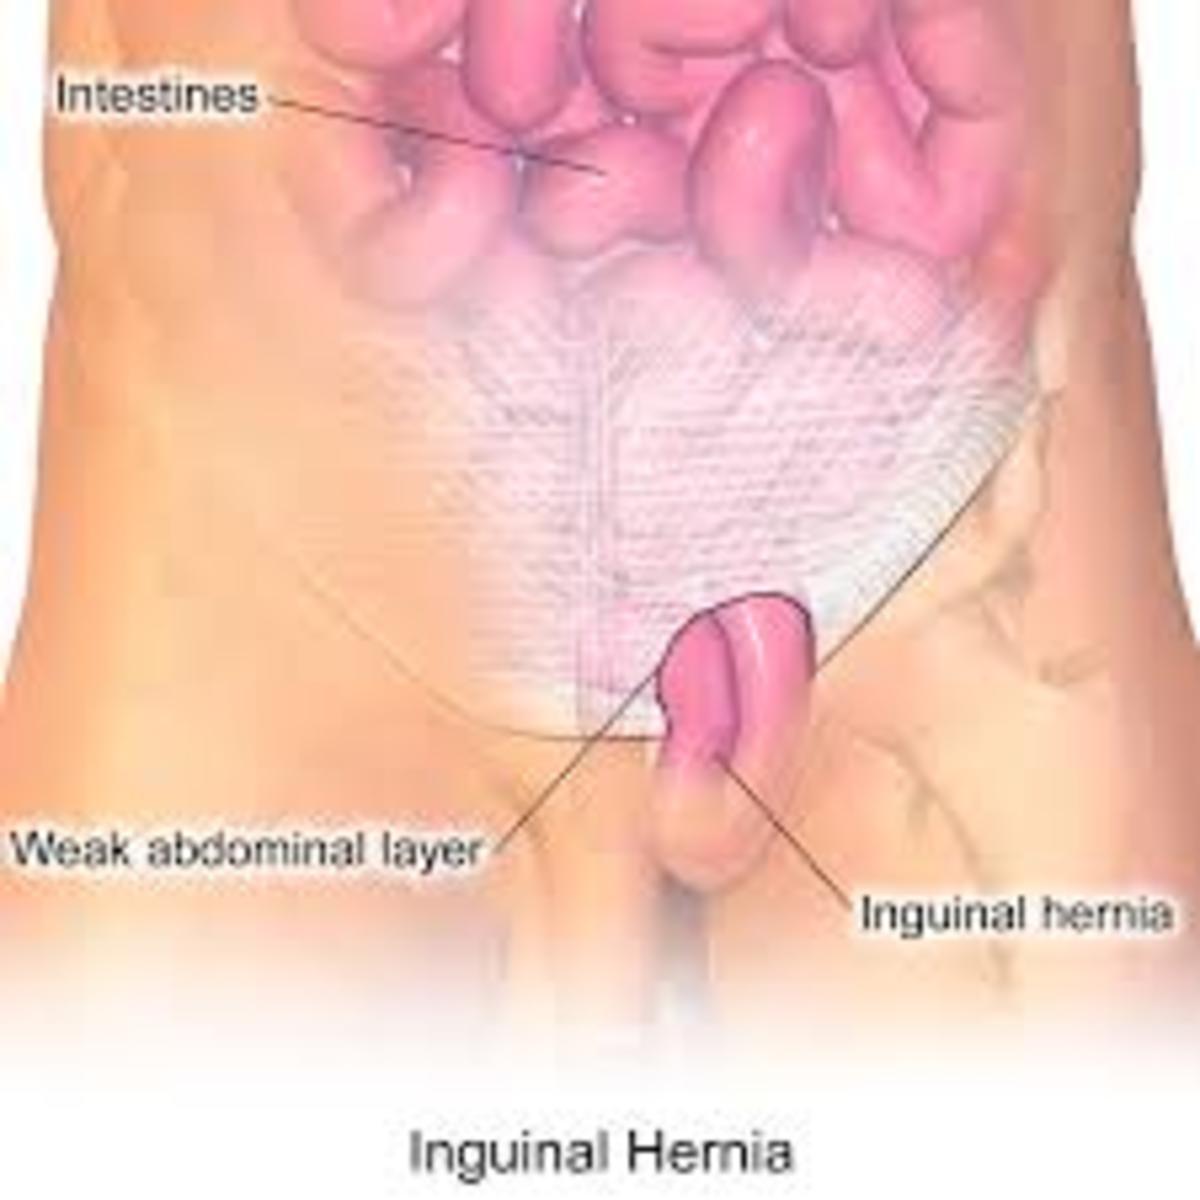 The Inguinal Hernia Location